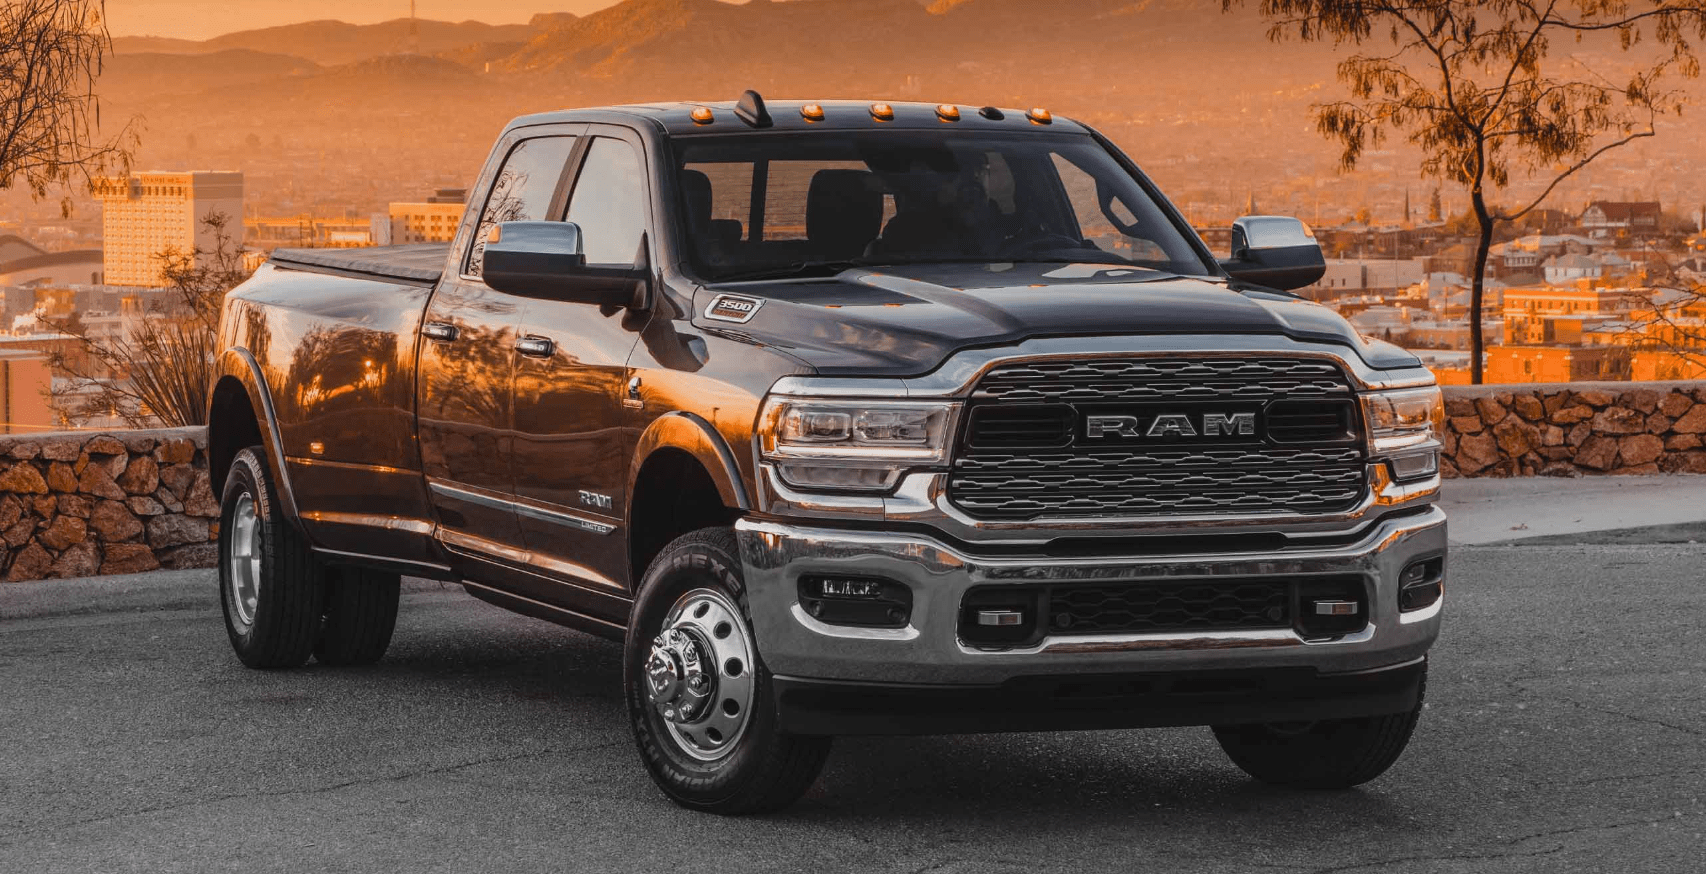 2024 RAM 3500 Dually release date The Cars Magz